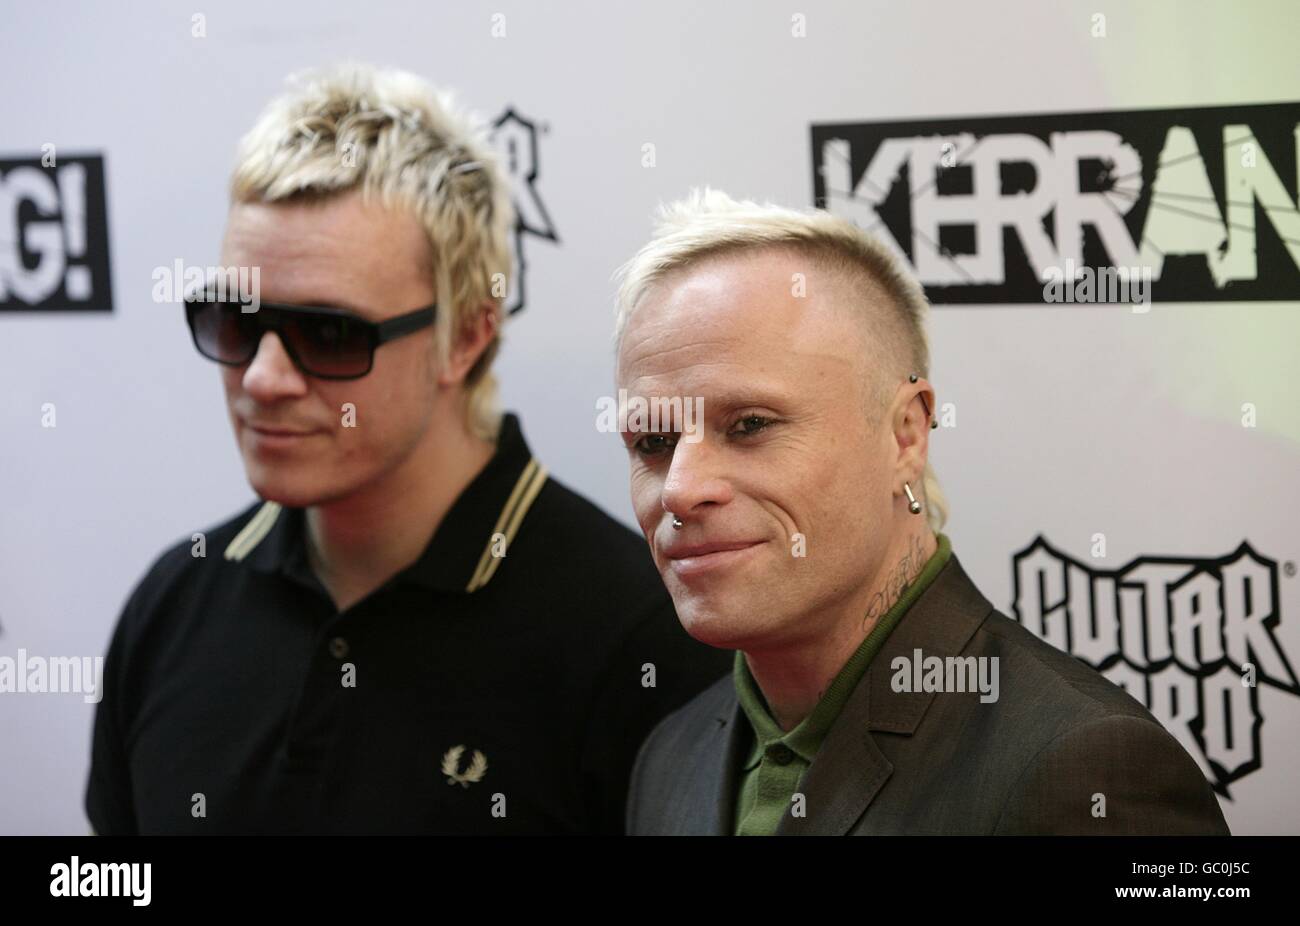 Kerrang Awards 2009 - London. Liam Howlett and Keith Flint (right) of The Prodigy arriving at the Kerrang! Awards, at the Brewery, London. Stock Photo